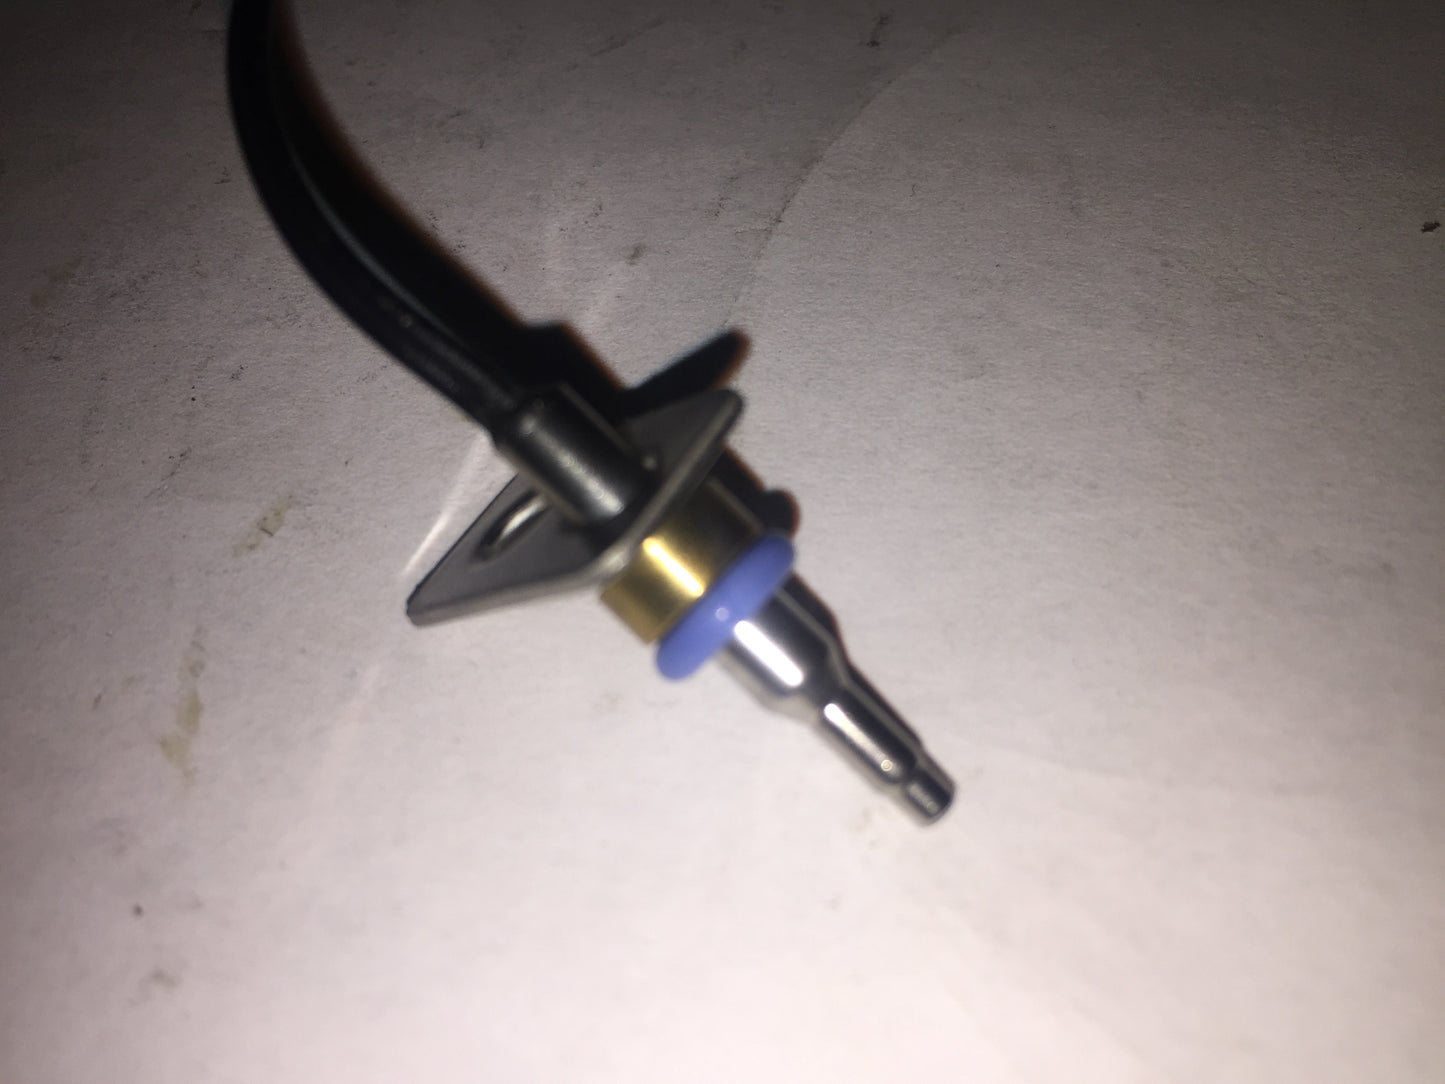 HOT WATER THERMISTOR FOR VRP SERIES TANKLESS WATER HEATERS 